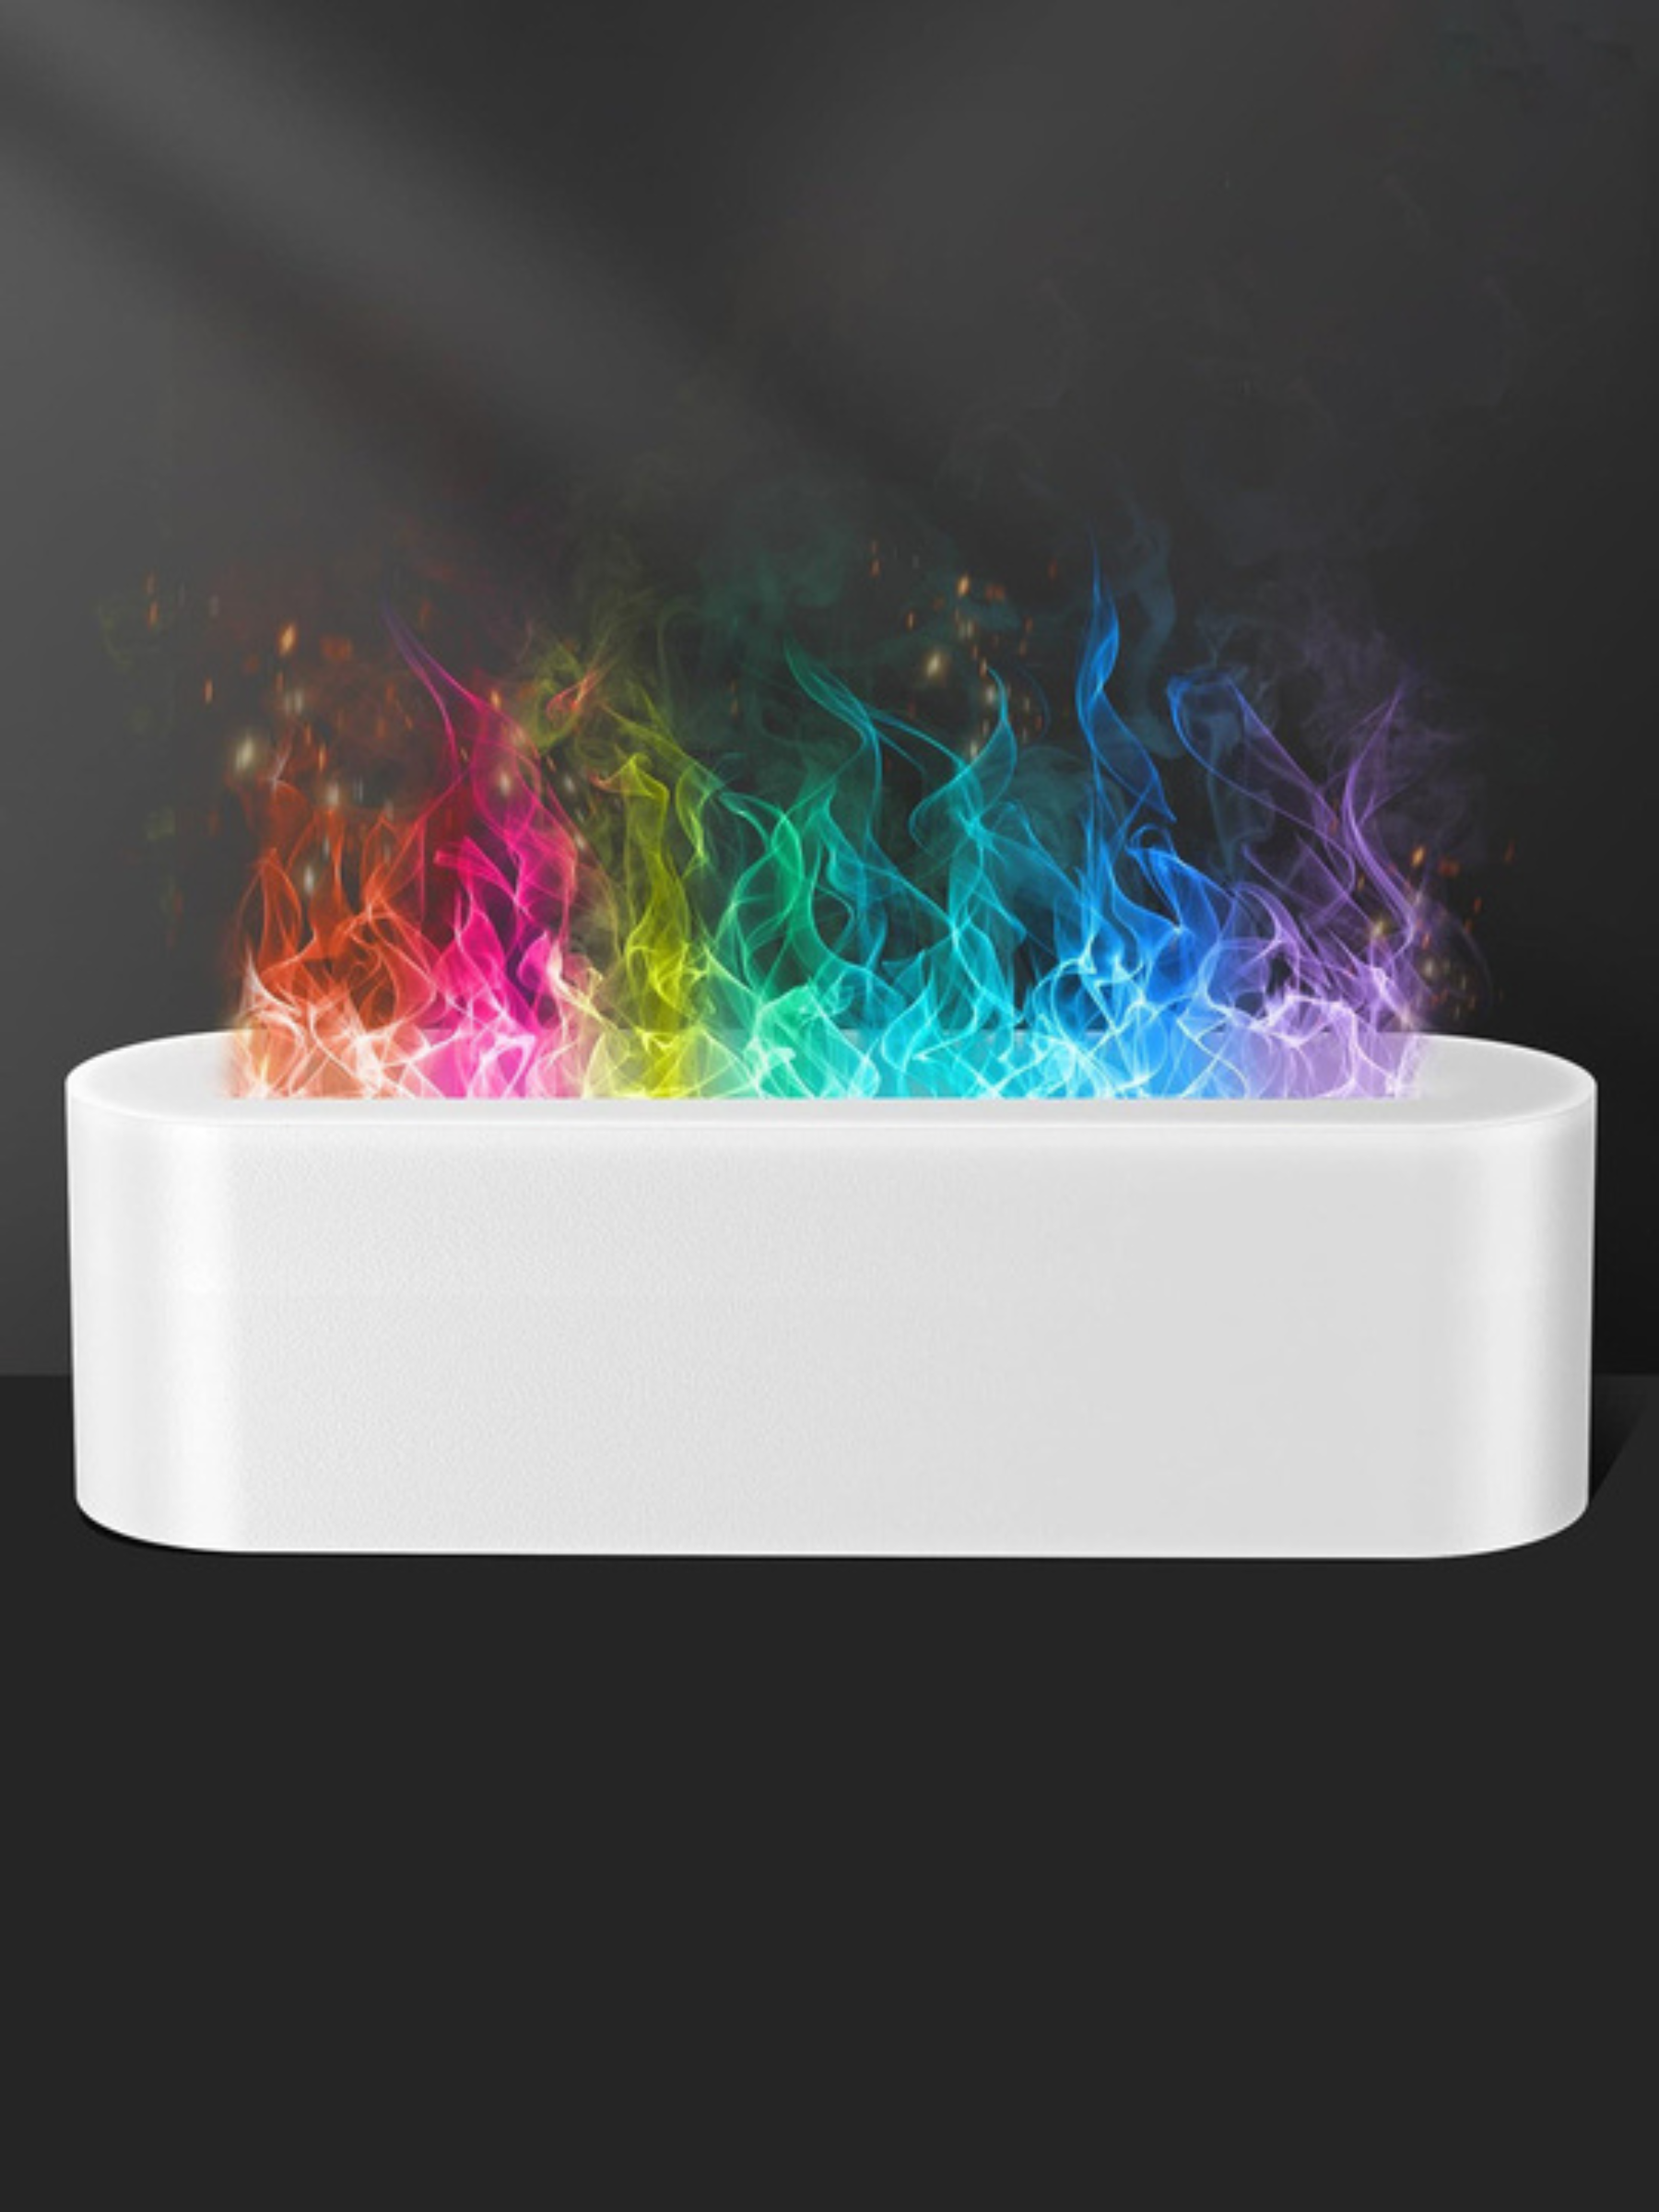 Equal parts pretty and practical, this essential oil diffuser features a fine mist with a color-changing LED that gives the effects of a flame. $43, Amazon. <a href="https://www.amazon.com/dp/B0C8D4NXWW?">Get it now!</a><p>Sign up for today’s biggest stories, from pop culture to politics.</p><a href="https://www.glamour.com/newsletter/news?sourceCode=msnsend">Sign Up</a>